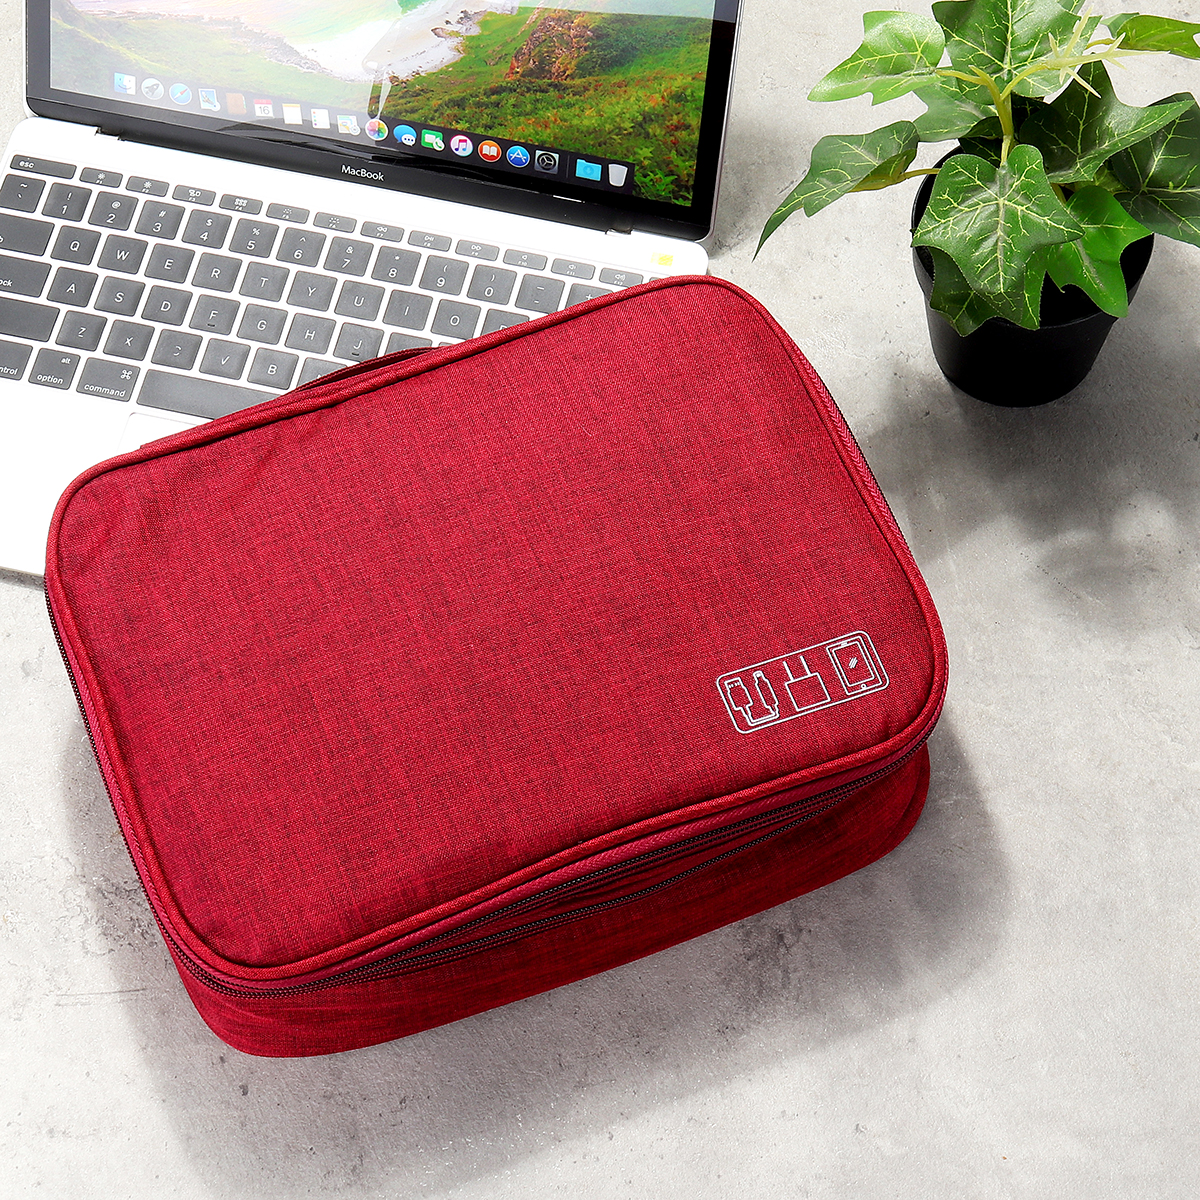 Data-Cable-Storage-Bag-Multifunctional-Digital-Devices-Stationery-Case-Portable-Travel-Electronic-Po-1782315-9